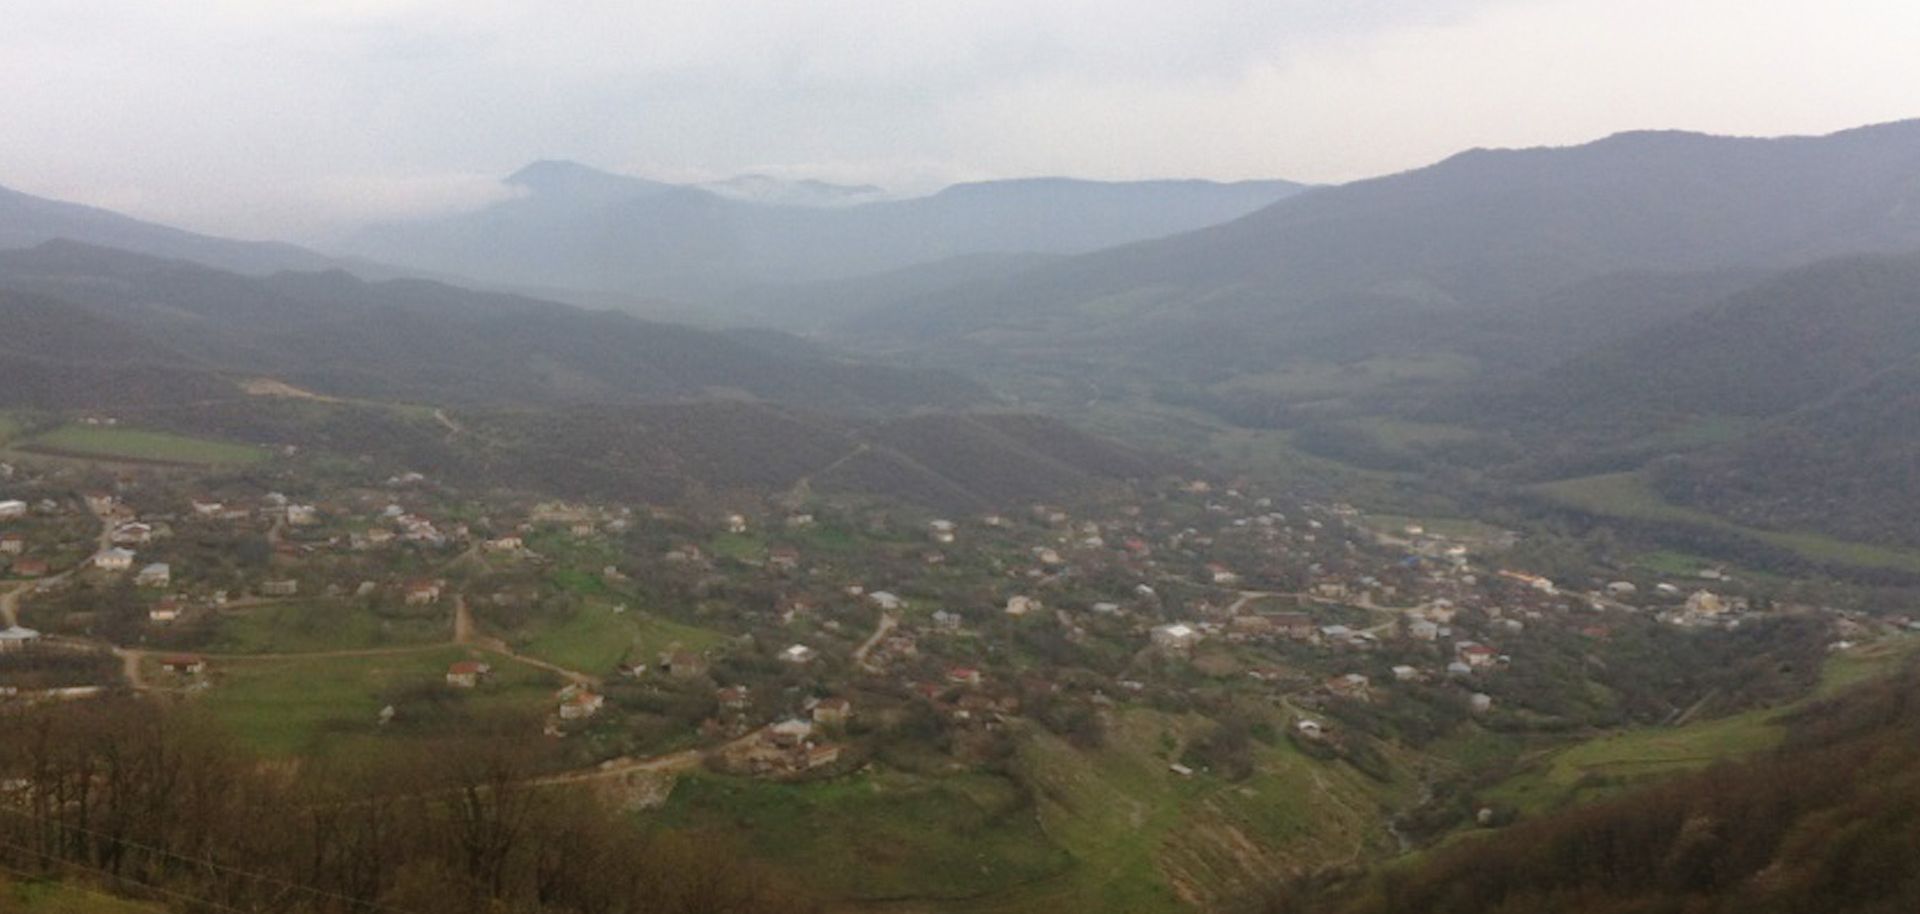 A trip to Nagorno-Karabakh, a separatist region in Azerbaijan, taught me about life in a land of simmering tension.